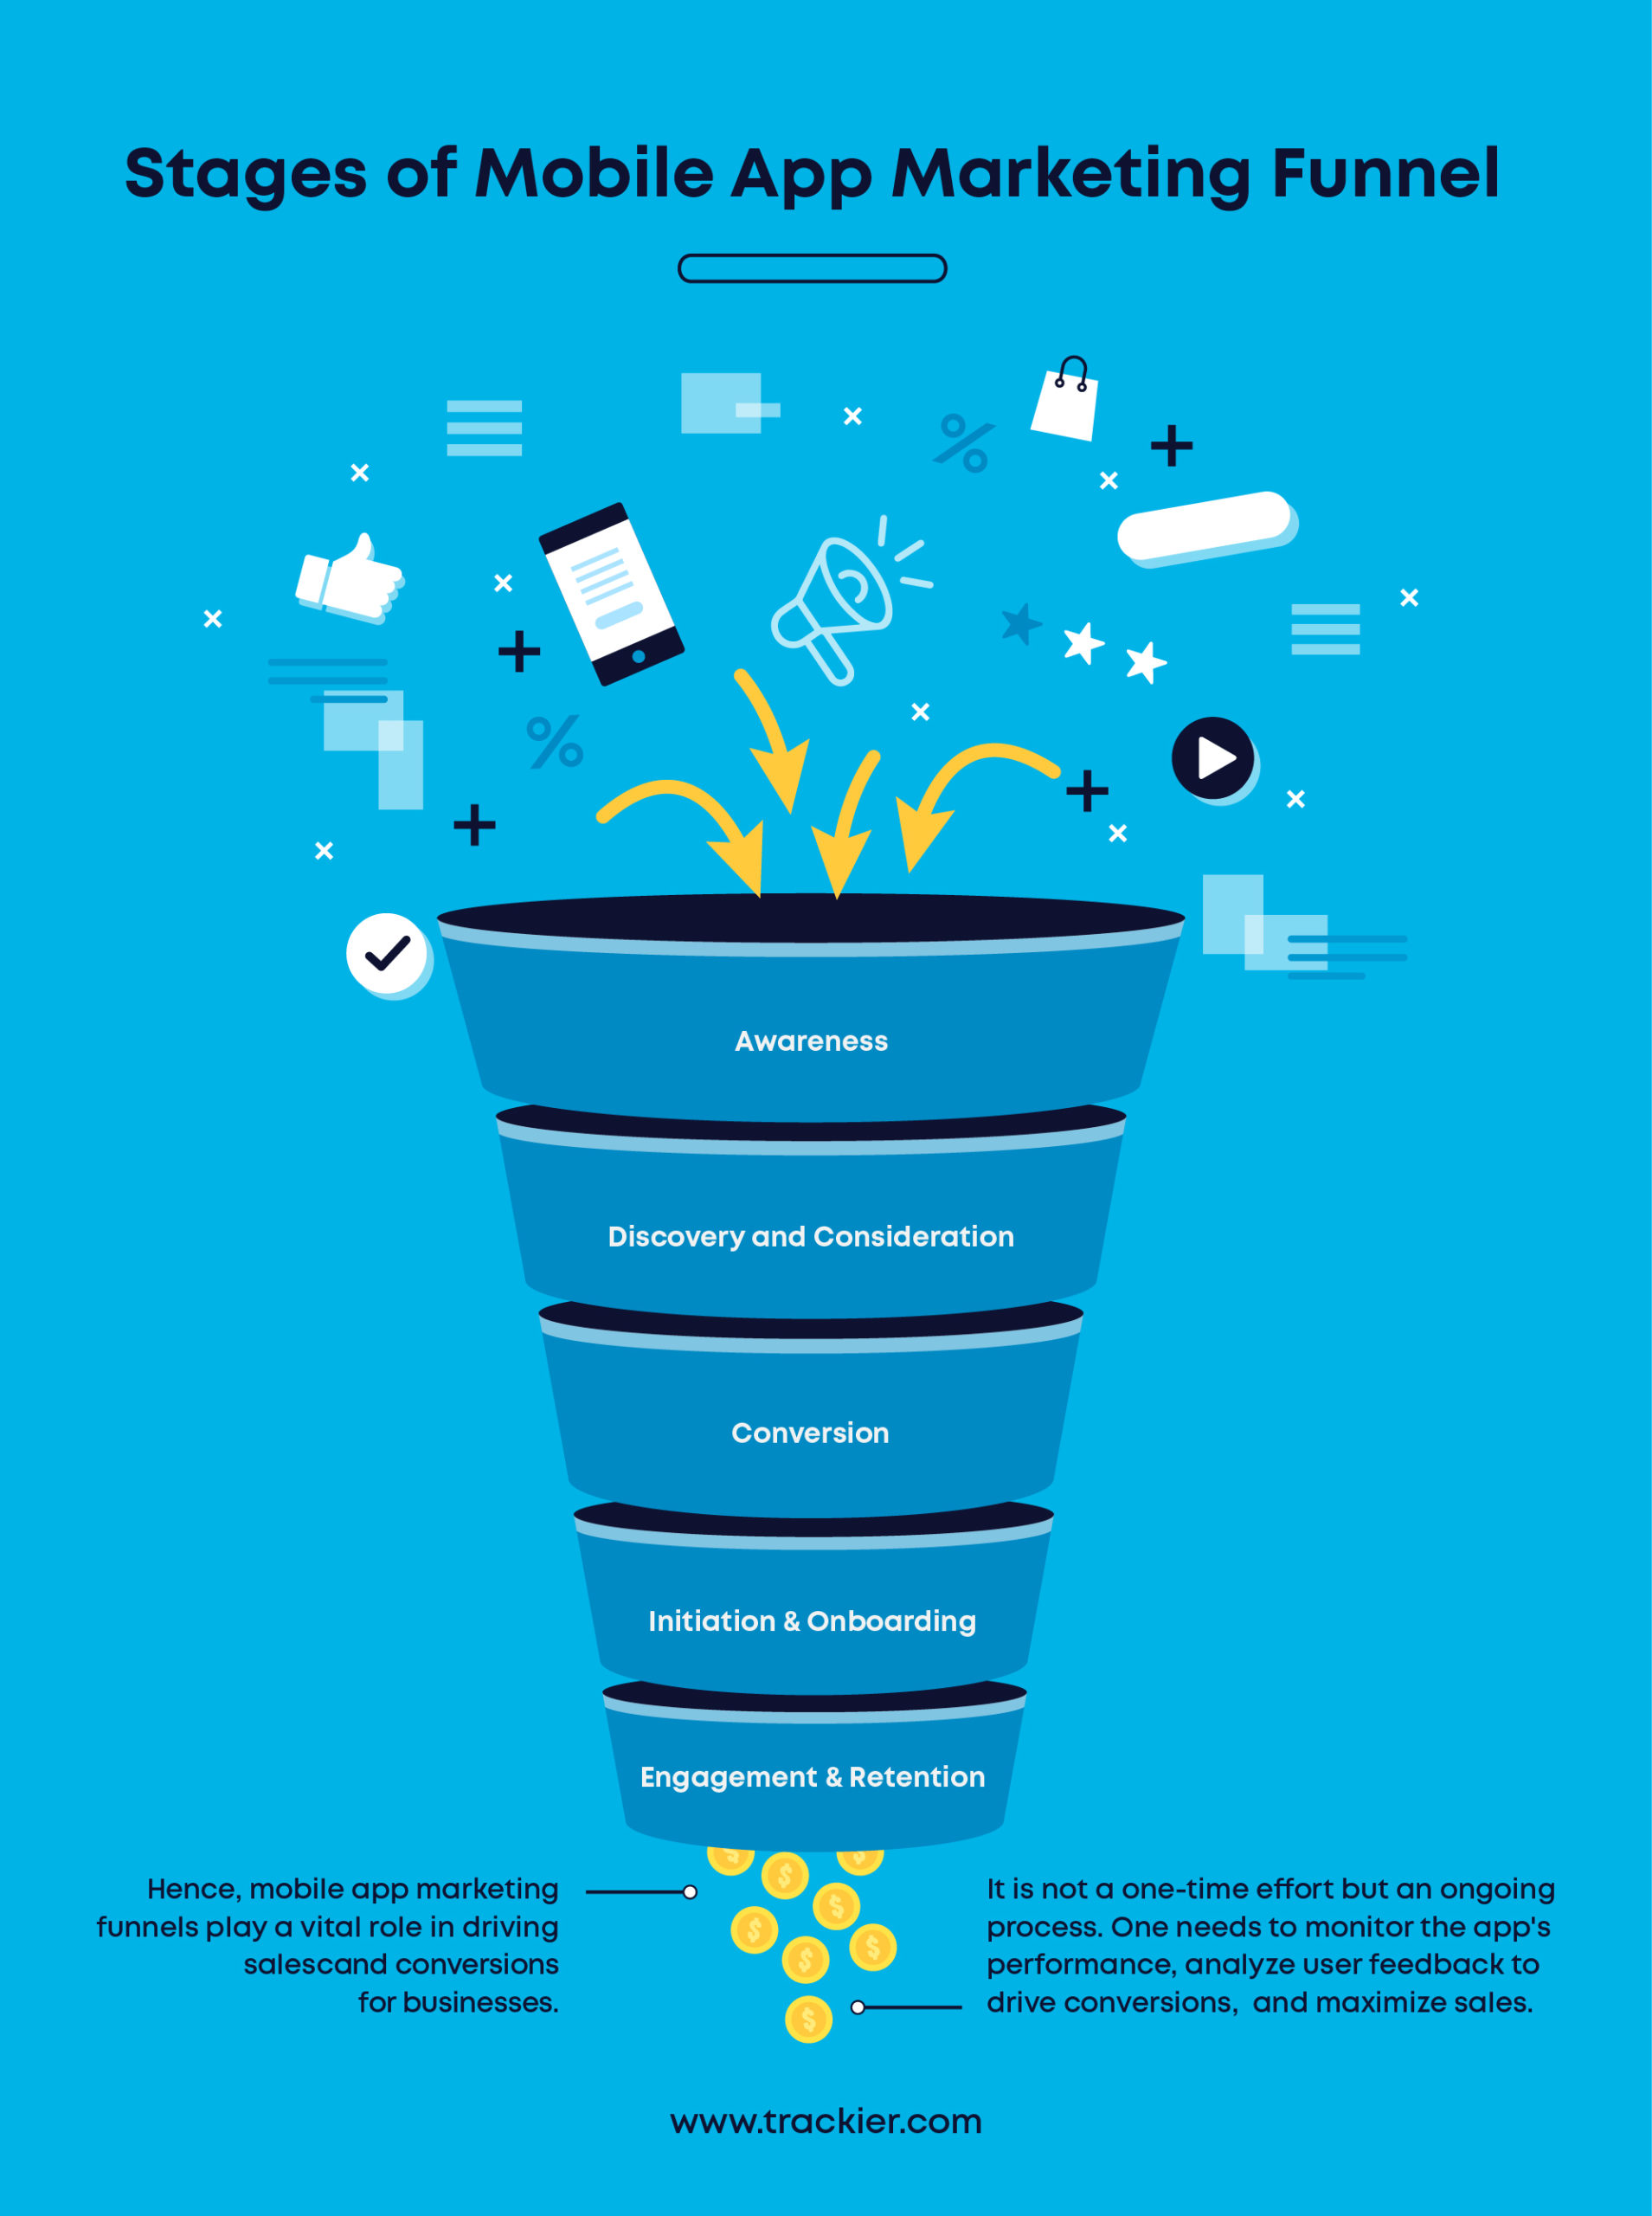 Understanding and navigating the mobile app marketing funnel effectively.